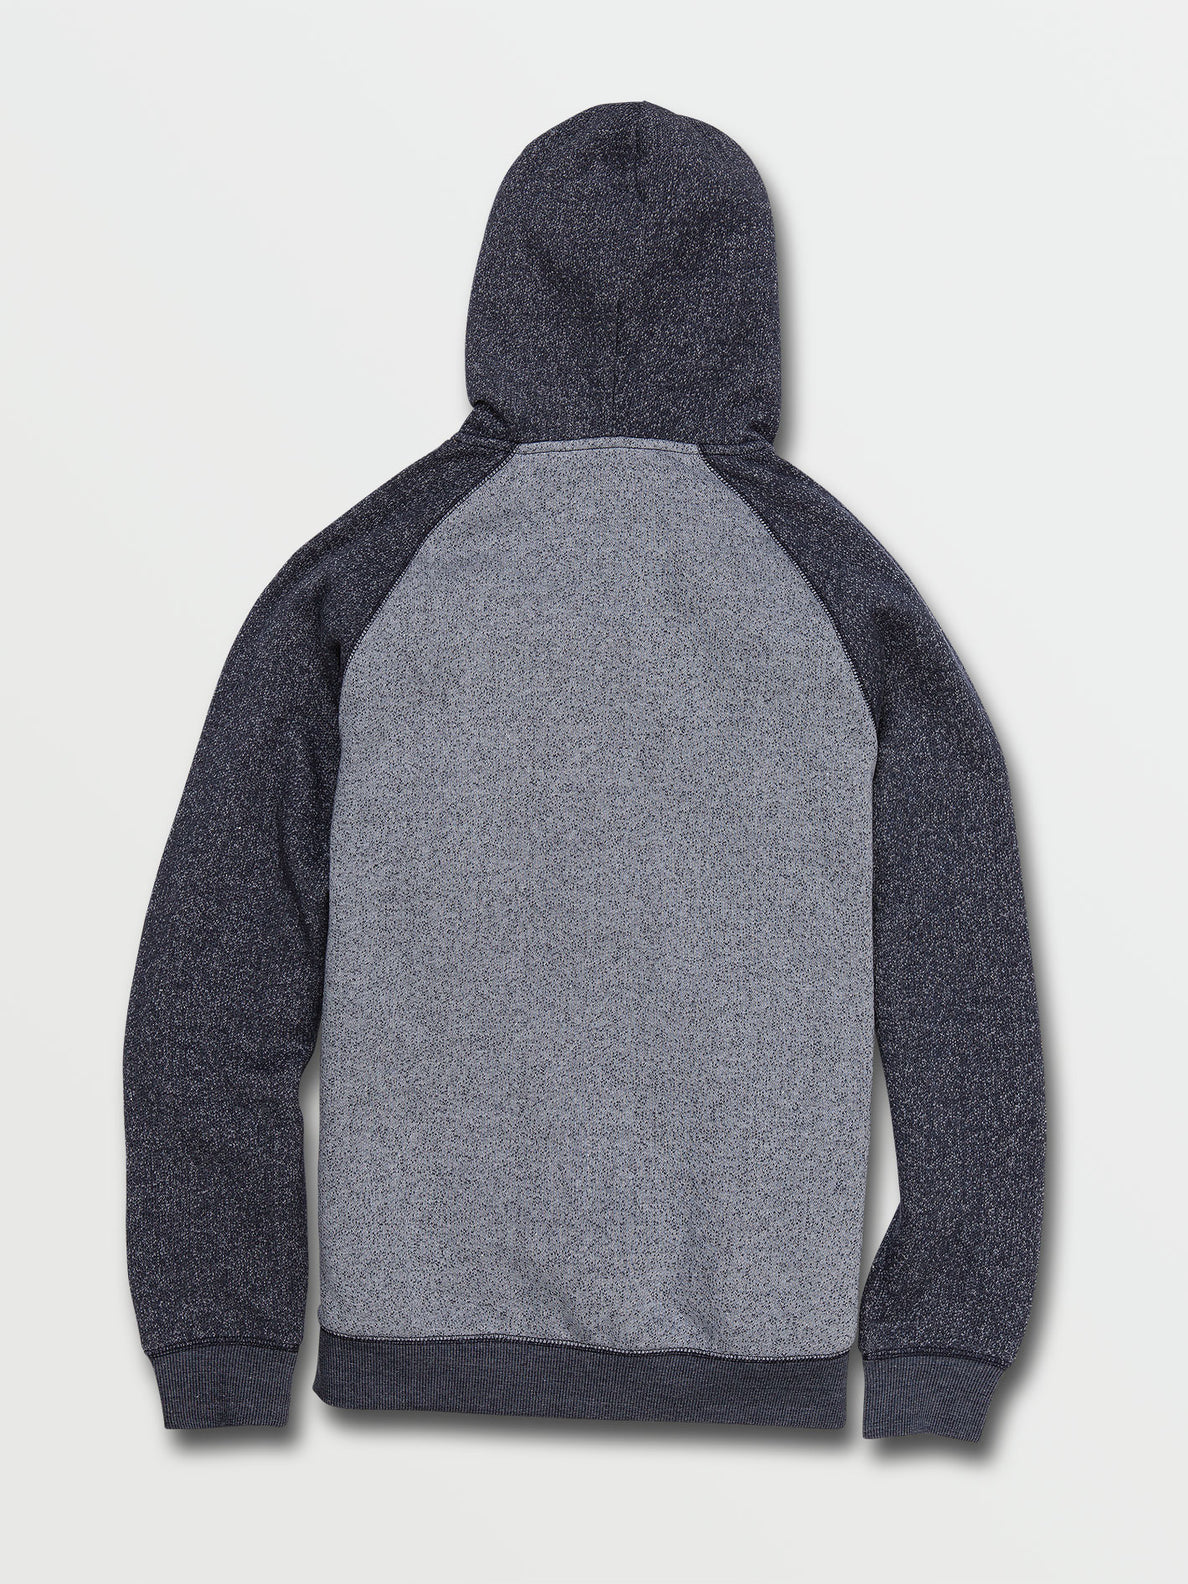 Substance Of Pullover Hoodie - Navy (A4142102_NVY) [B]